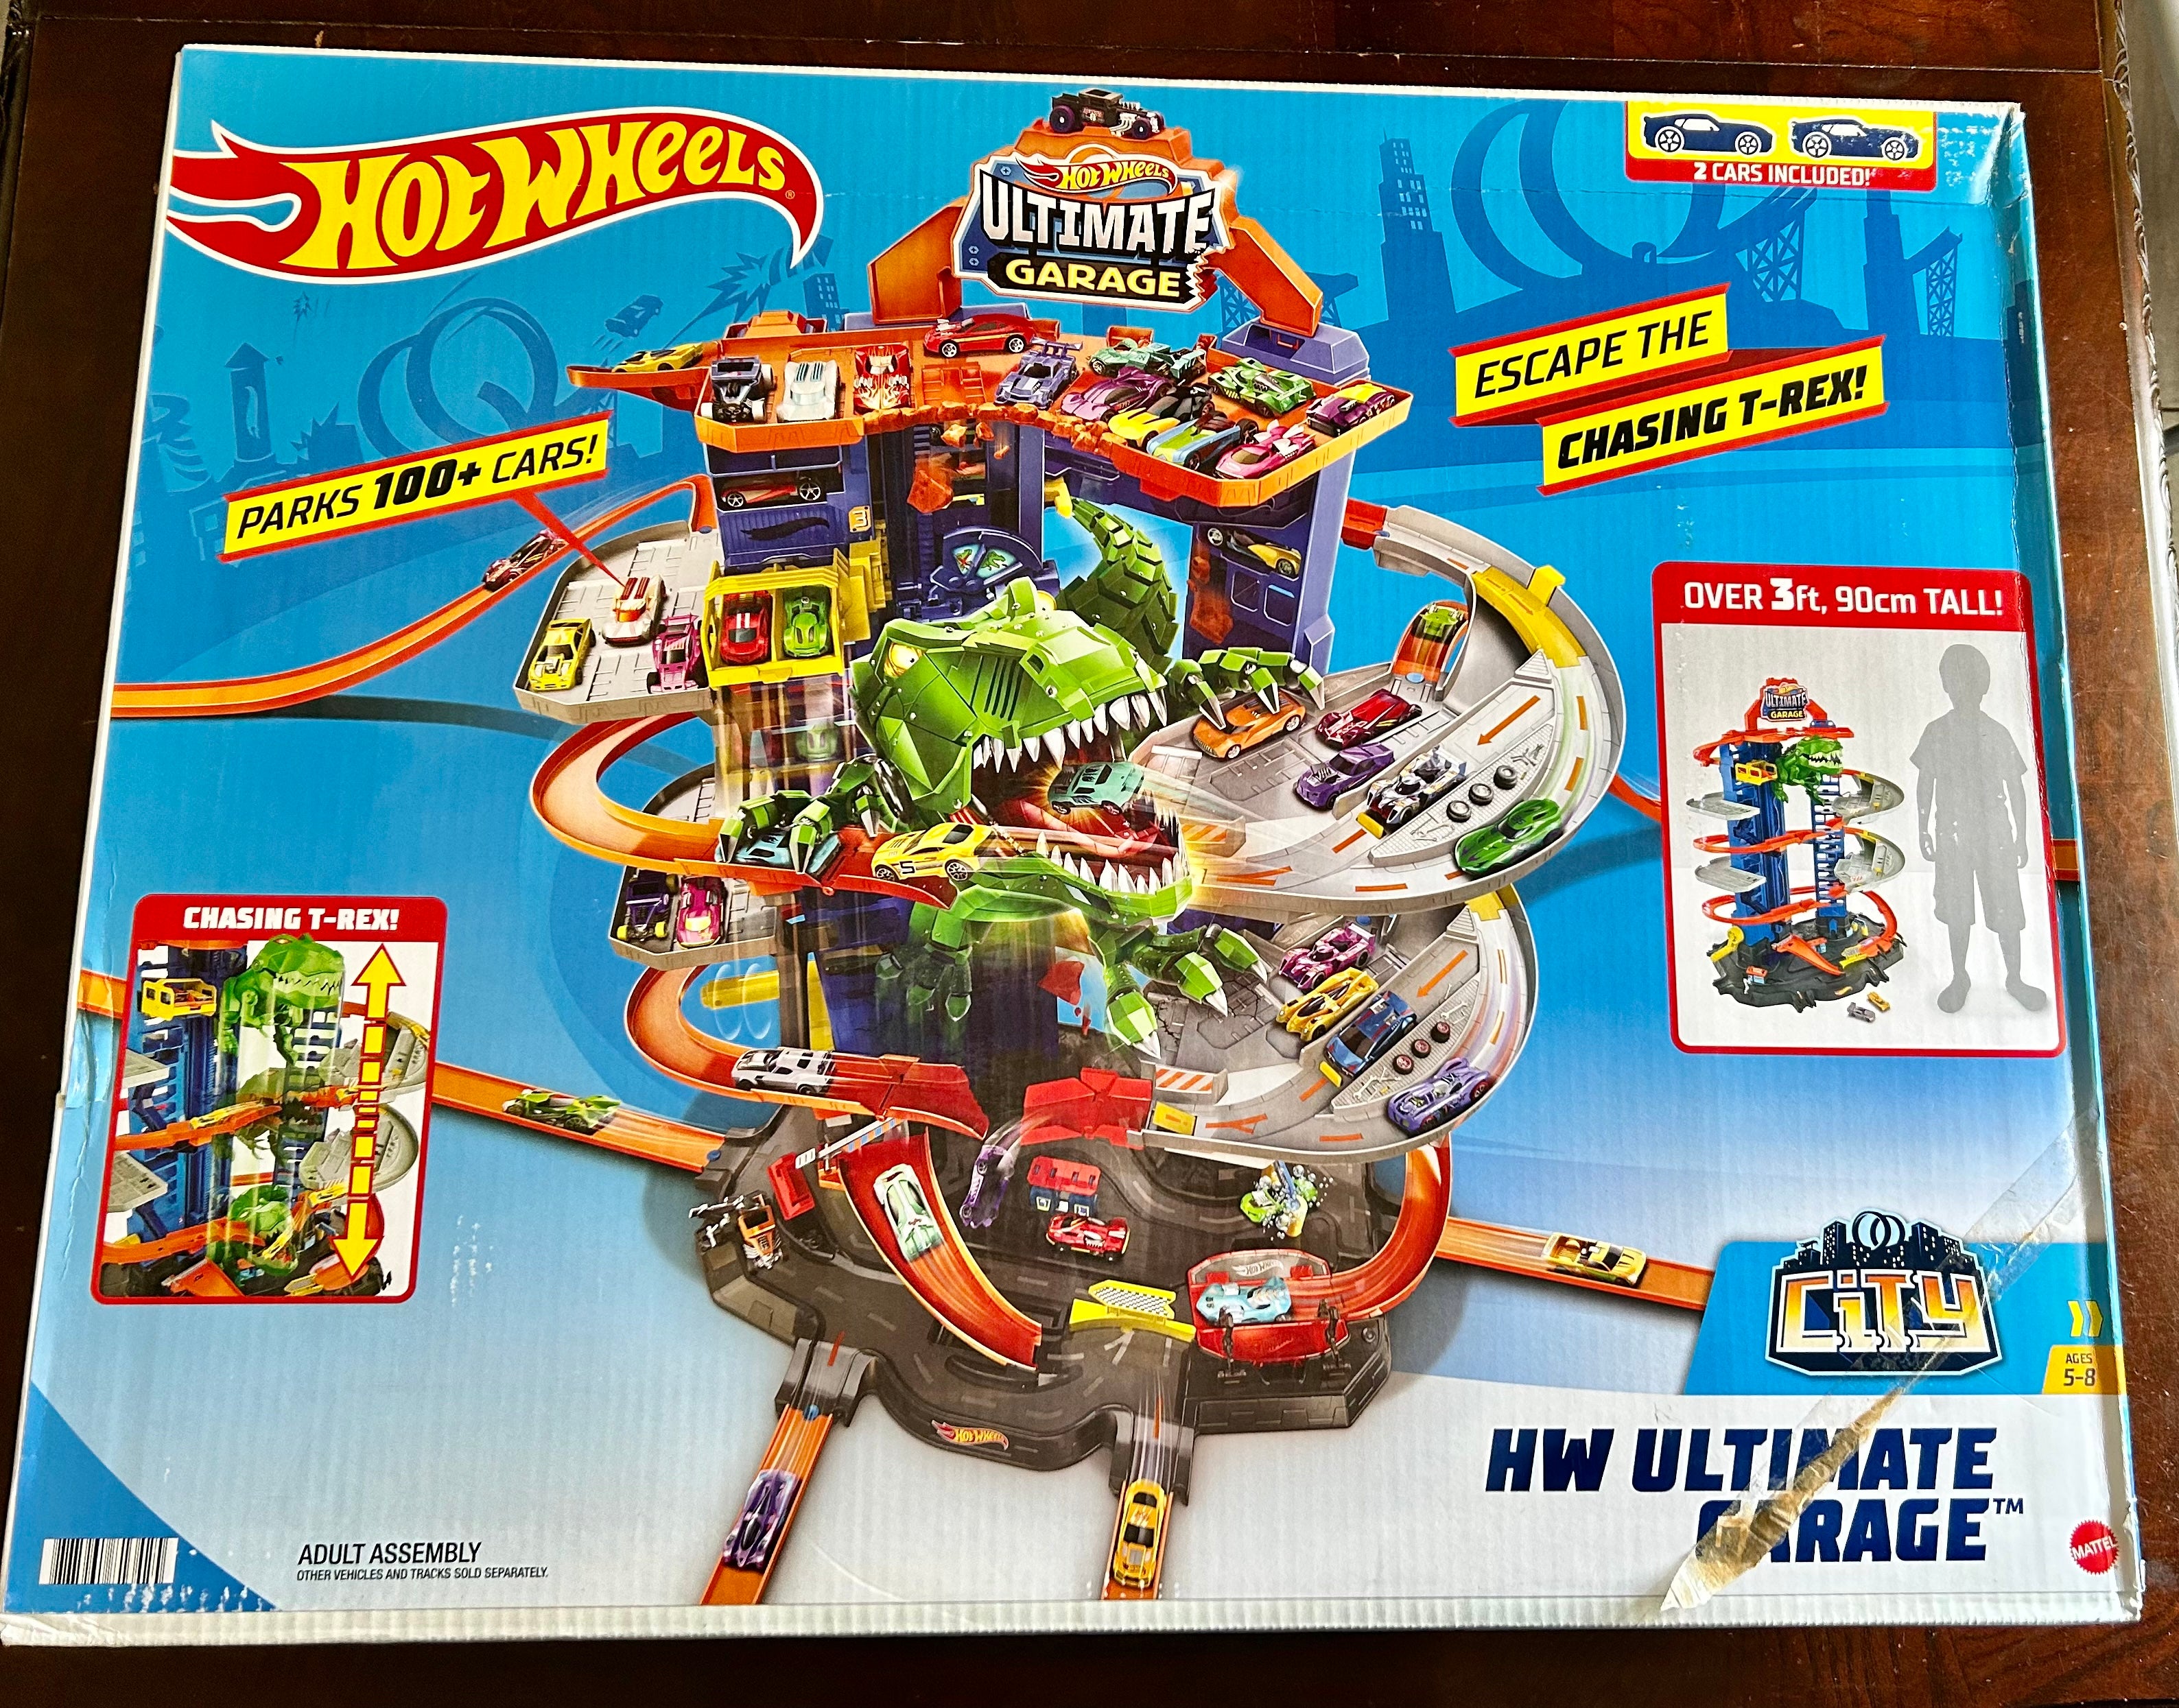 HOT WHEELS Track Set with 1:64 Scale Toy Firetruck, City Fire Station with  Dragon Nemesis and Track Play, Dragon Drive Firefight